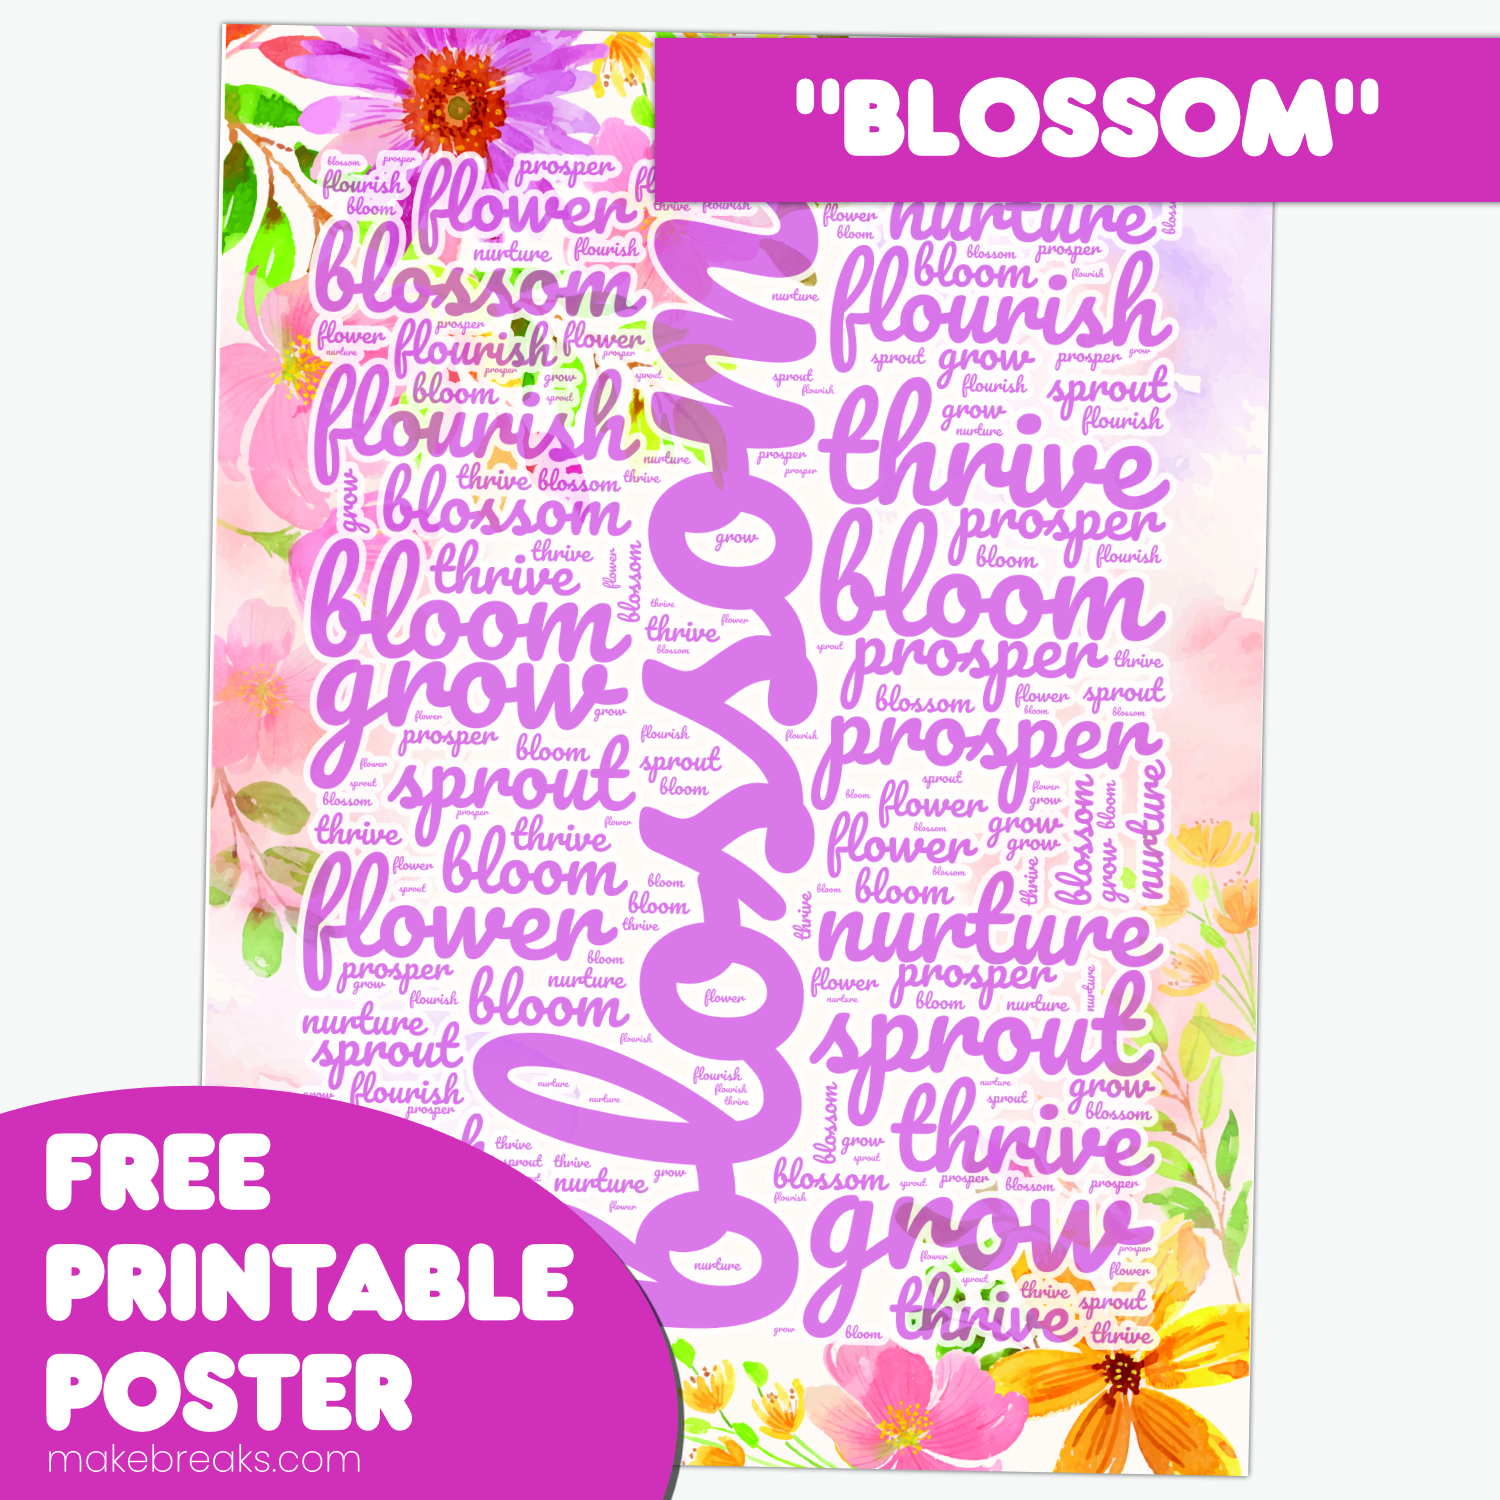 Free Printable ‘Blossom’ Themed Word Cloud Poster